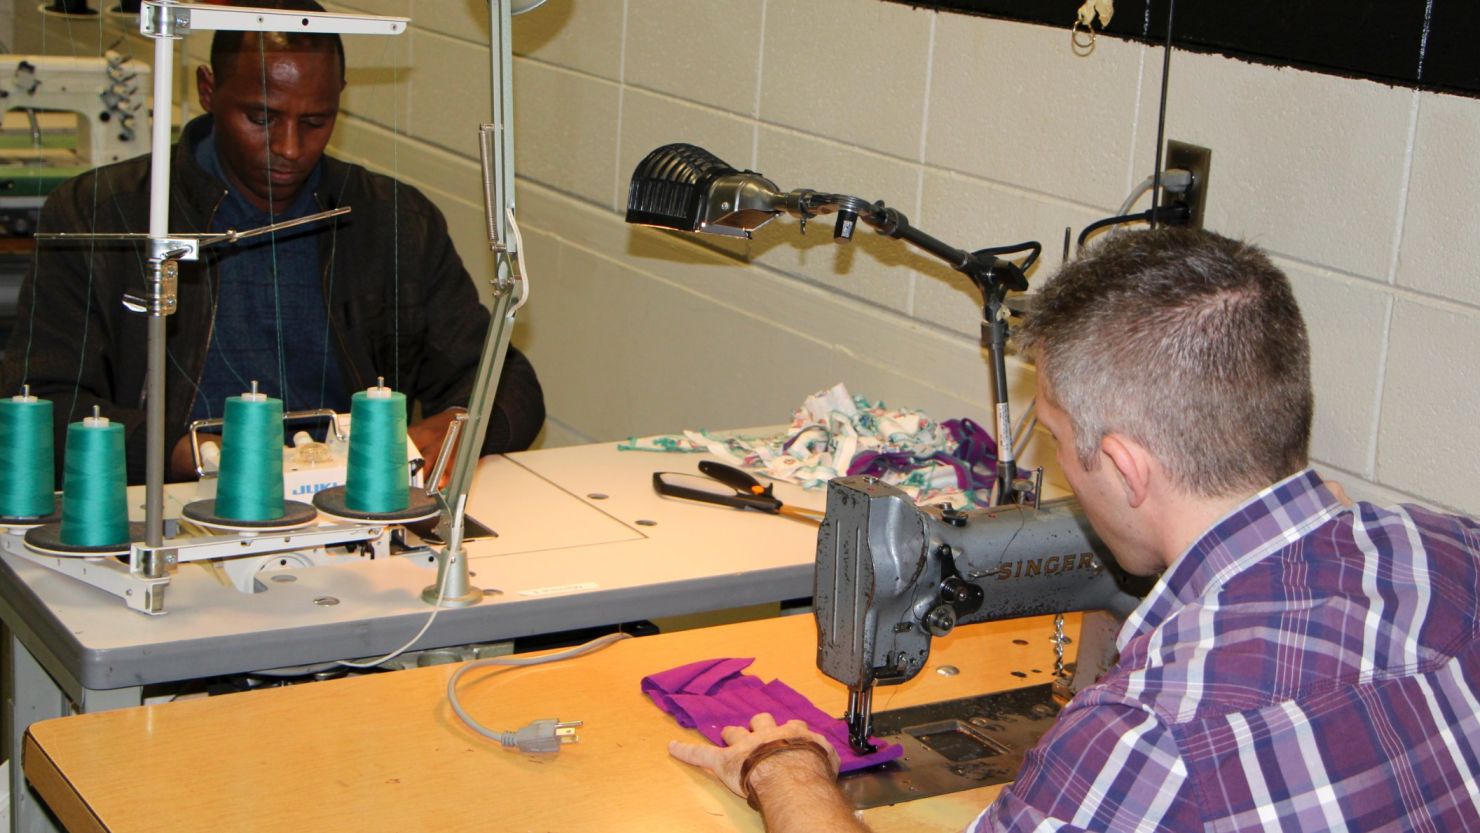 Students learn industrial cutting and sewing in a training program organized by a coalition of businesses and industry partners.